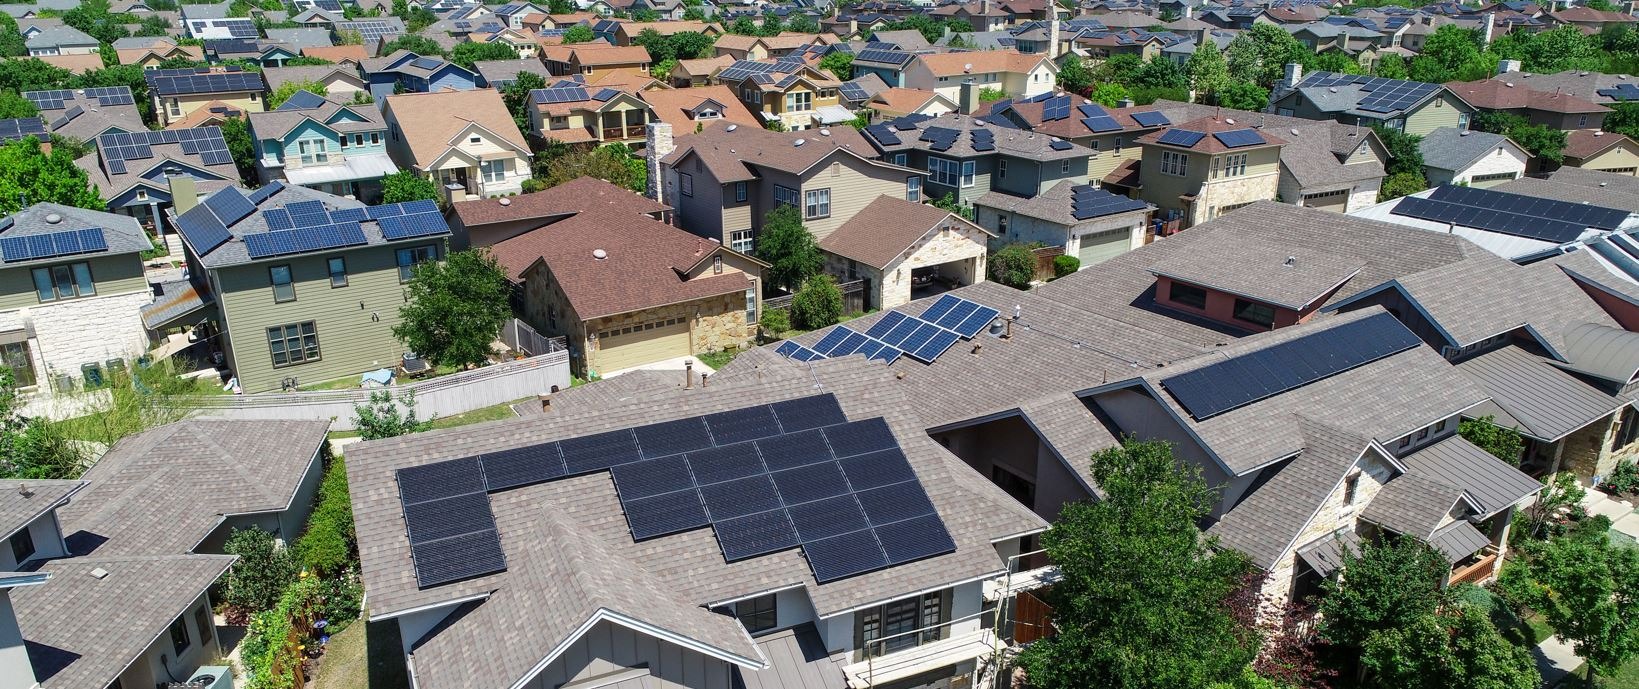 Buy solar panels: What are your options in 2023?